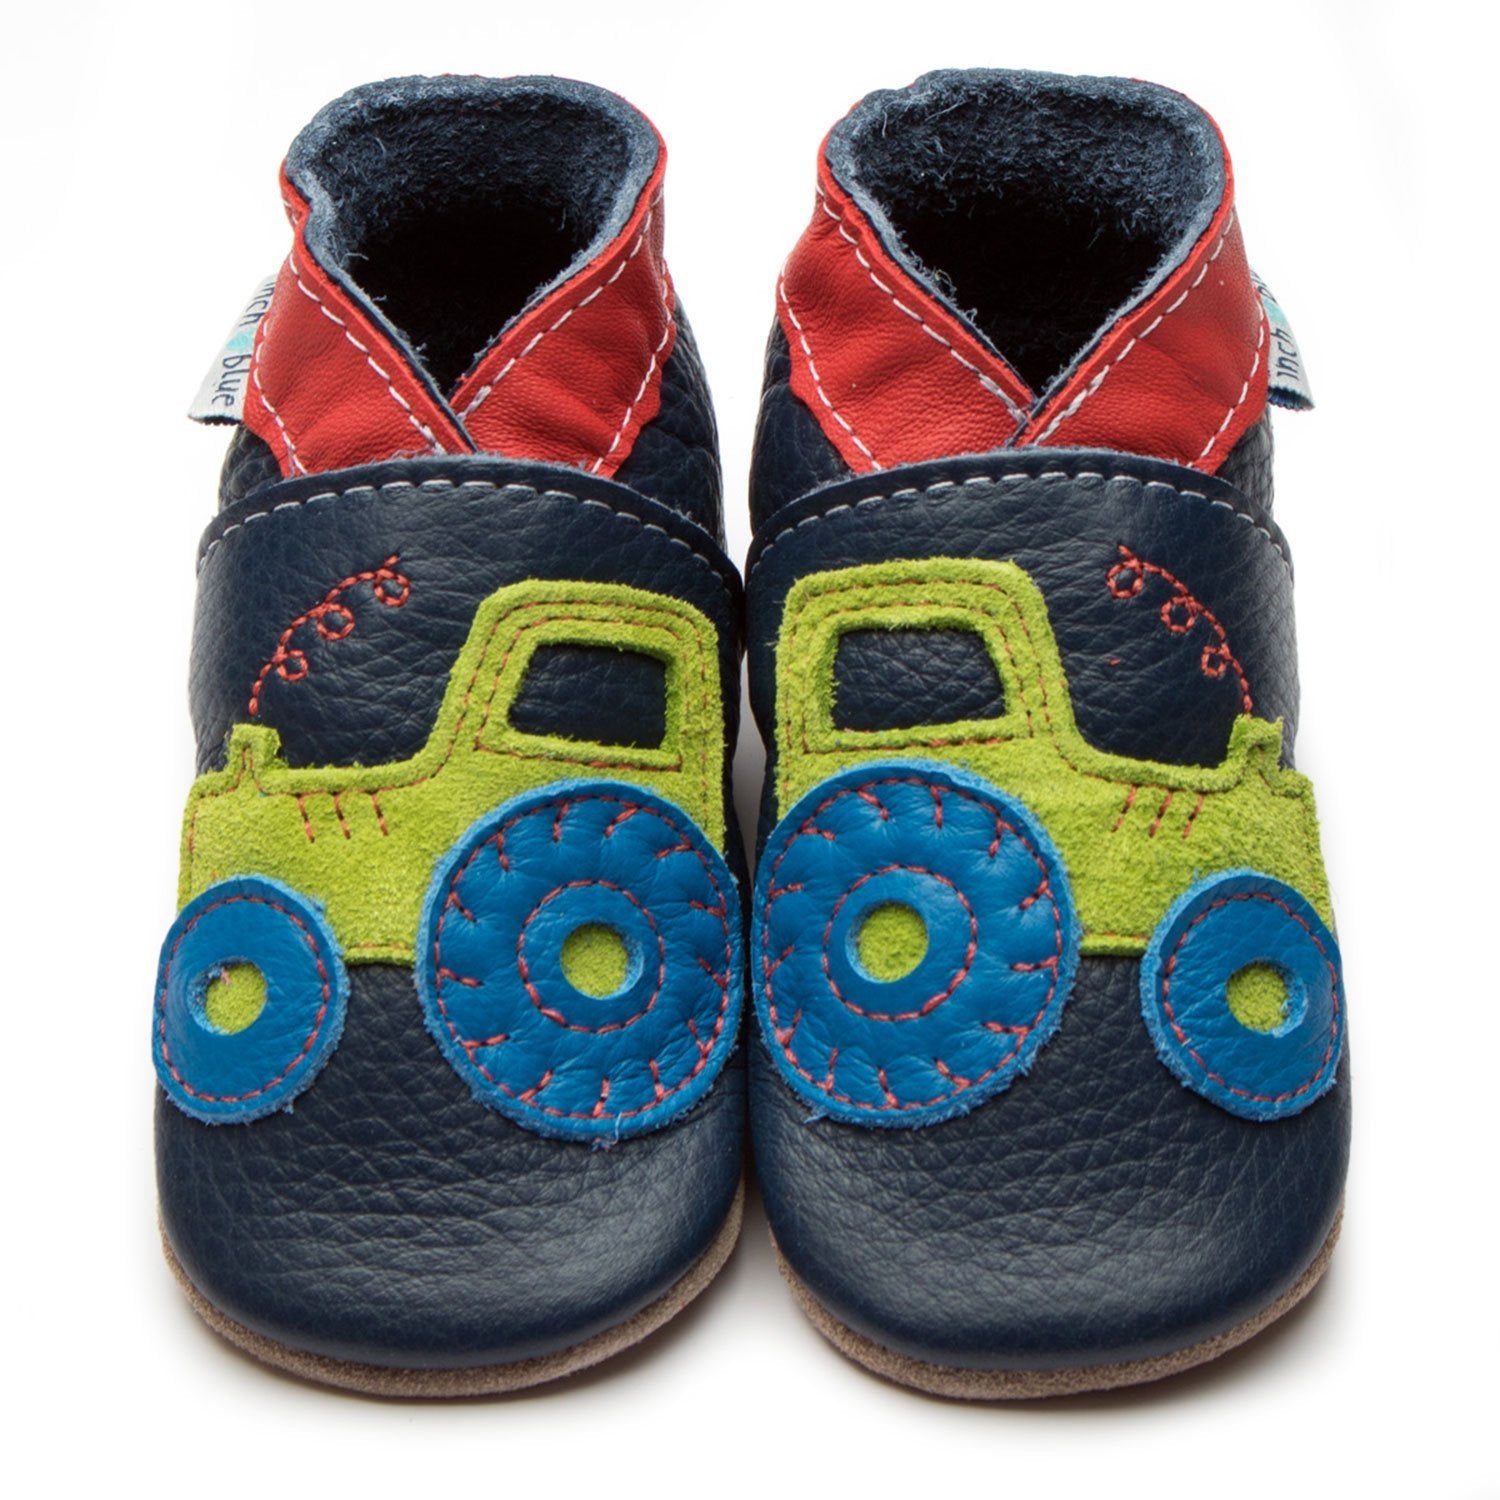 Inch Blue Baby Shoes Tractor Navy 2649 Footwear 0-6M / Navy,6-12M / Navy,12-18M / Navy